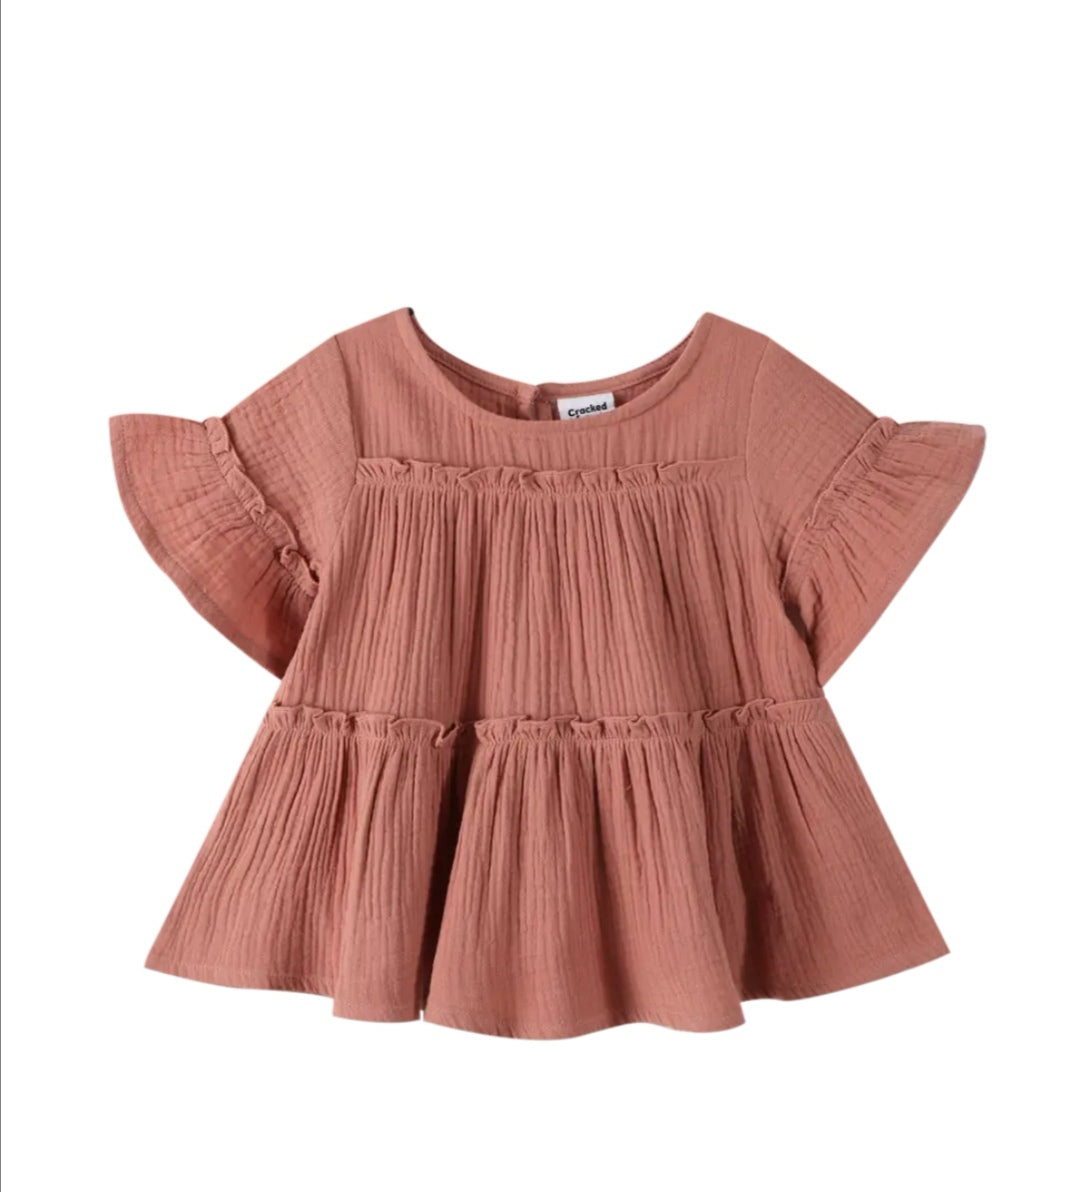 Indi Flare Sleeve Top - DUSTY PINK